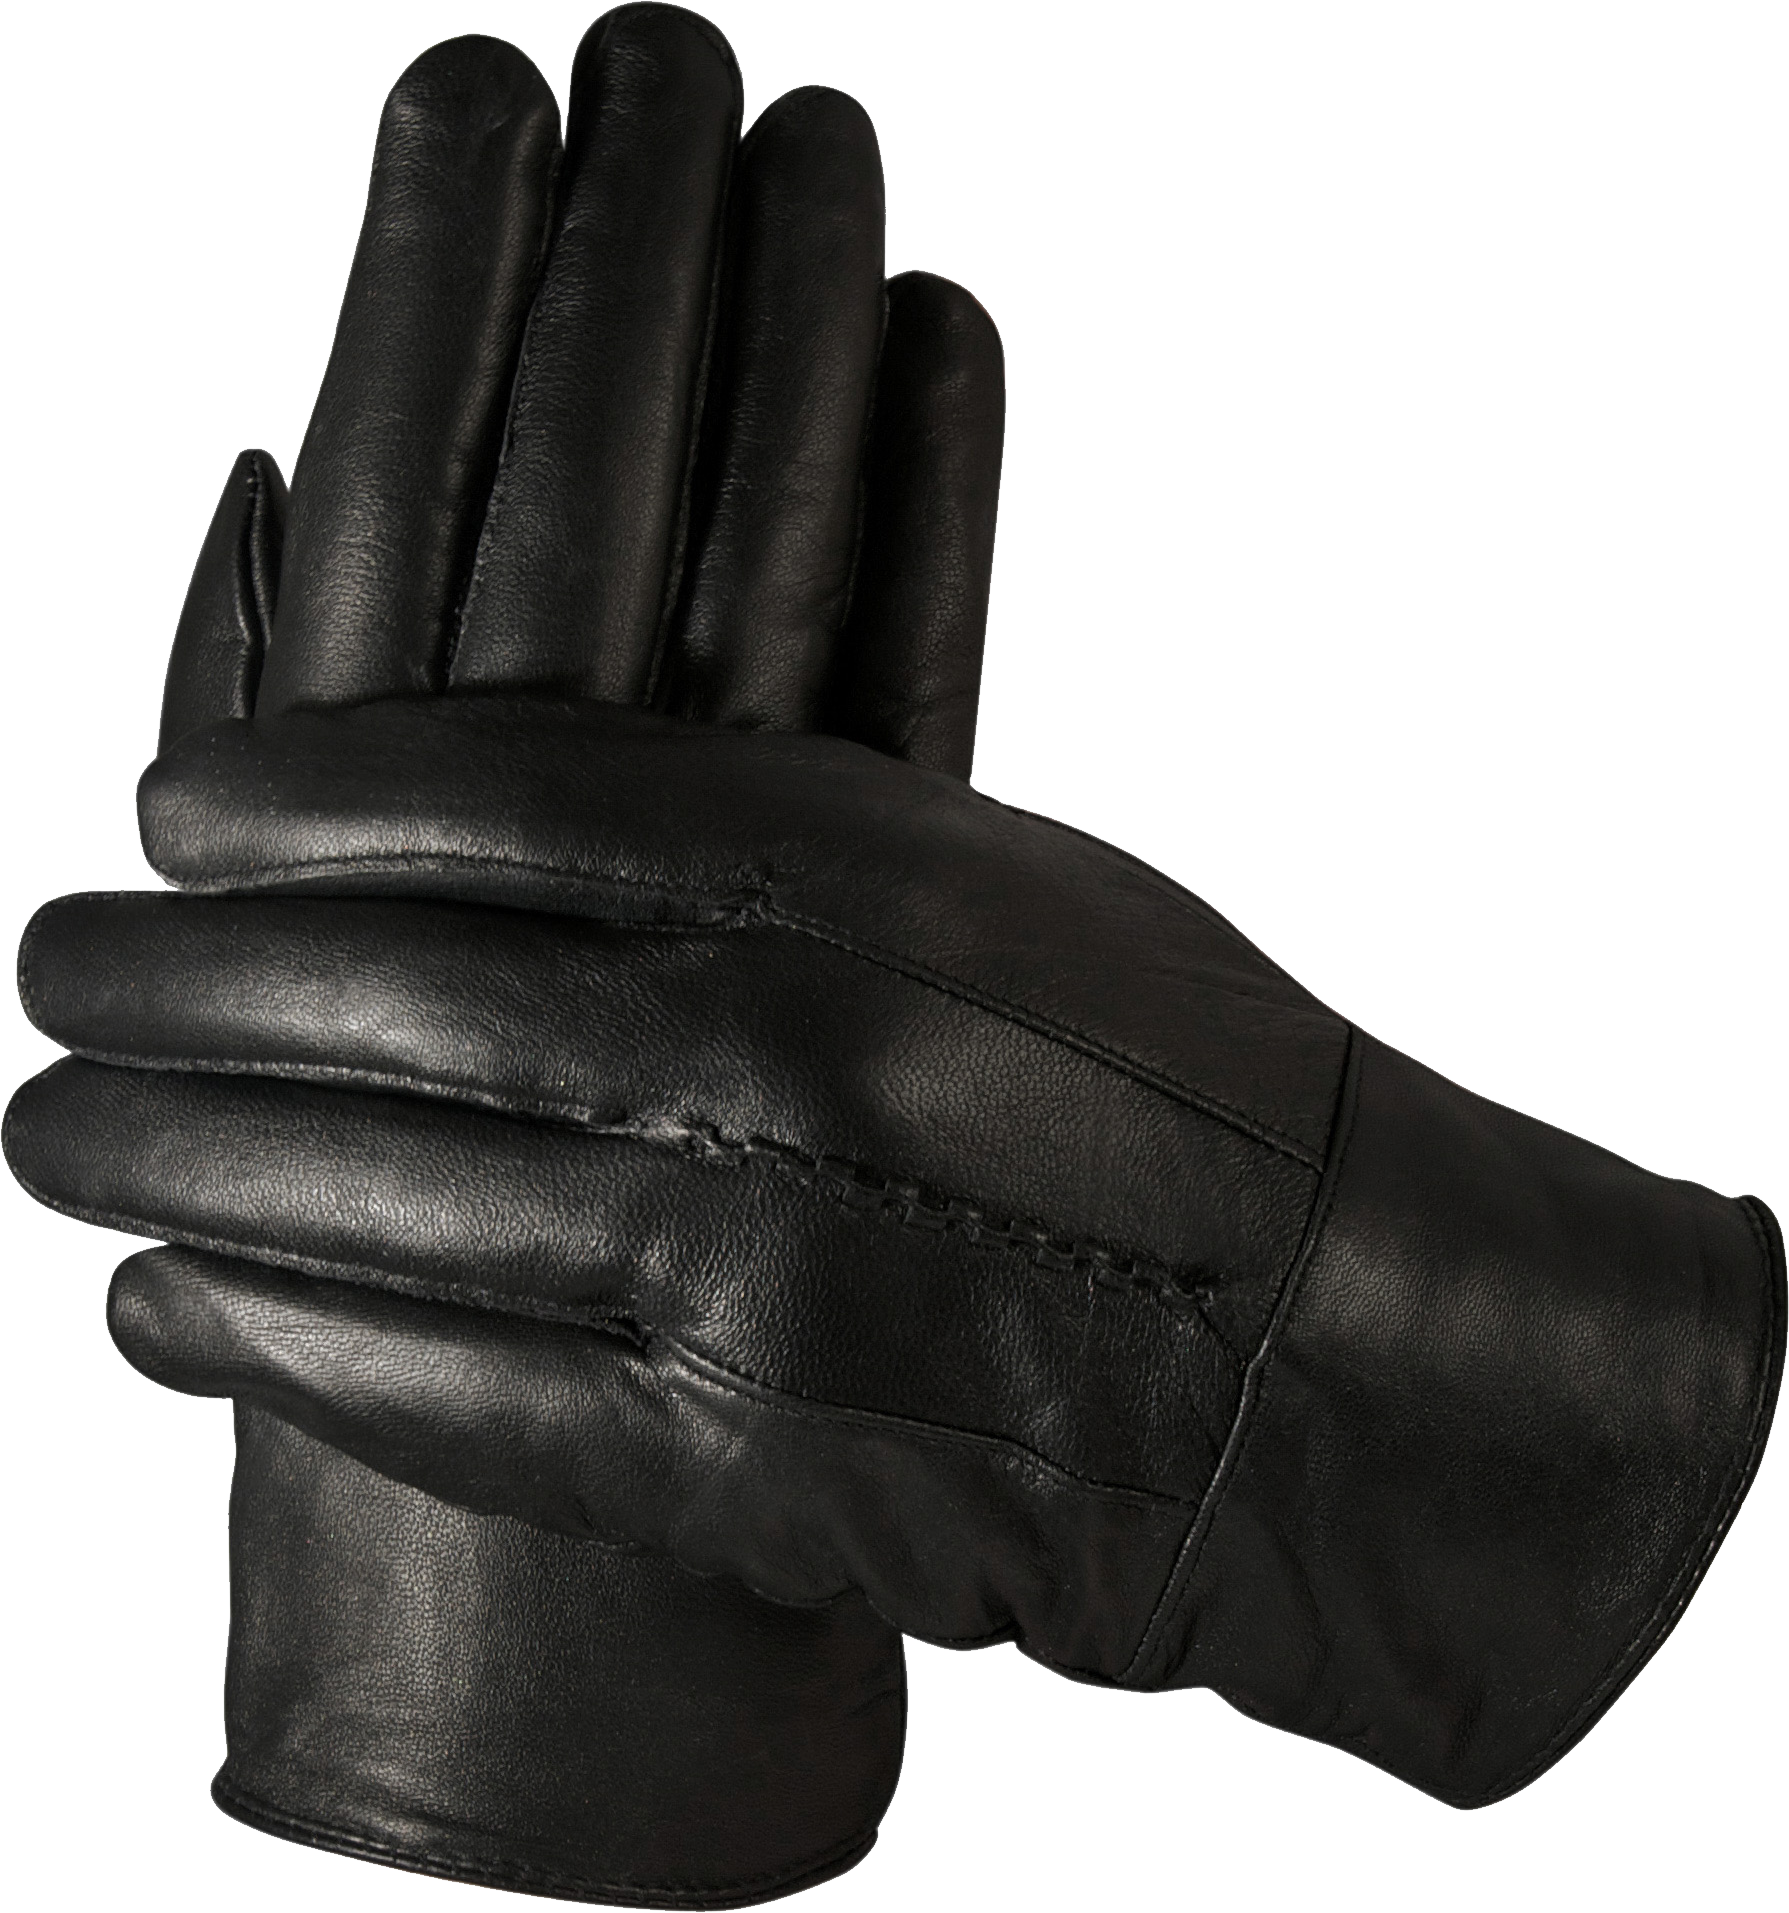 Gloves clipart leather.